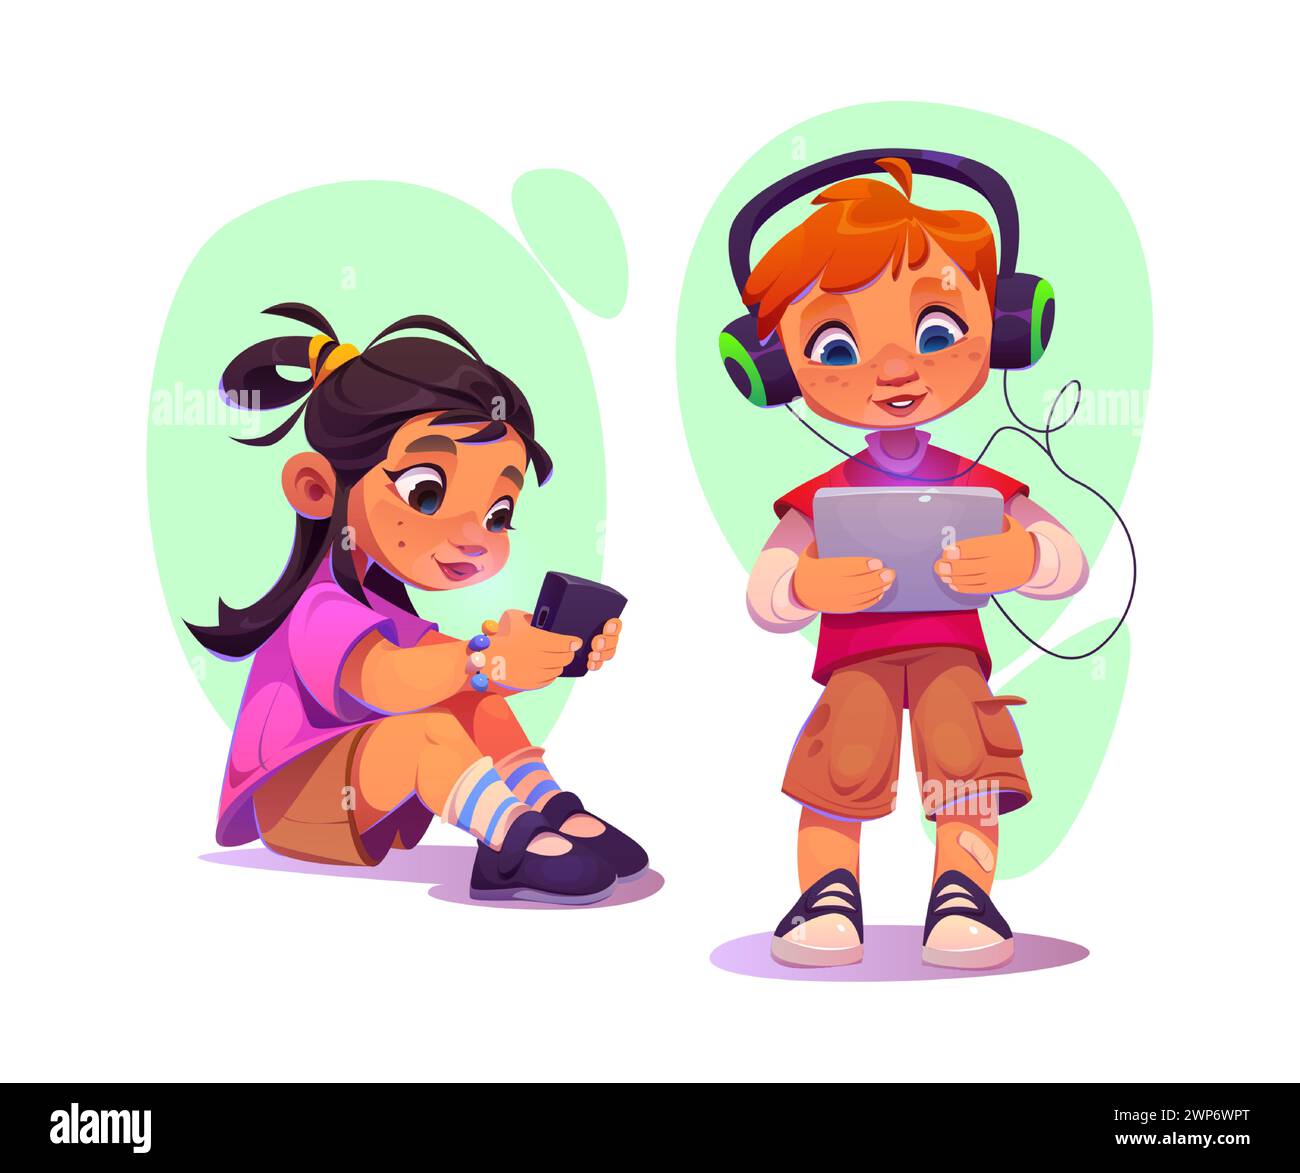 Children using gadgets isolated on white background. Vector cartoon illustration of girl sitting watching video on smartphone, boy in earphones playing game on tablet, technology addiction, education Stock Vector